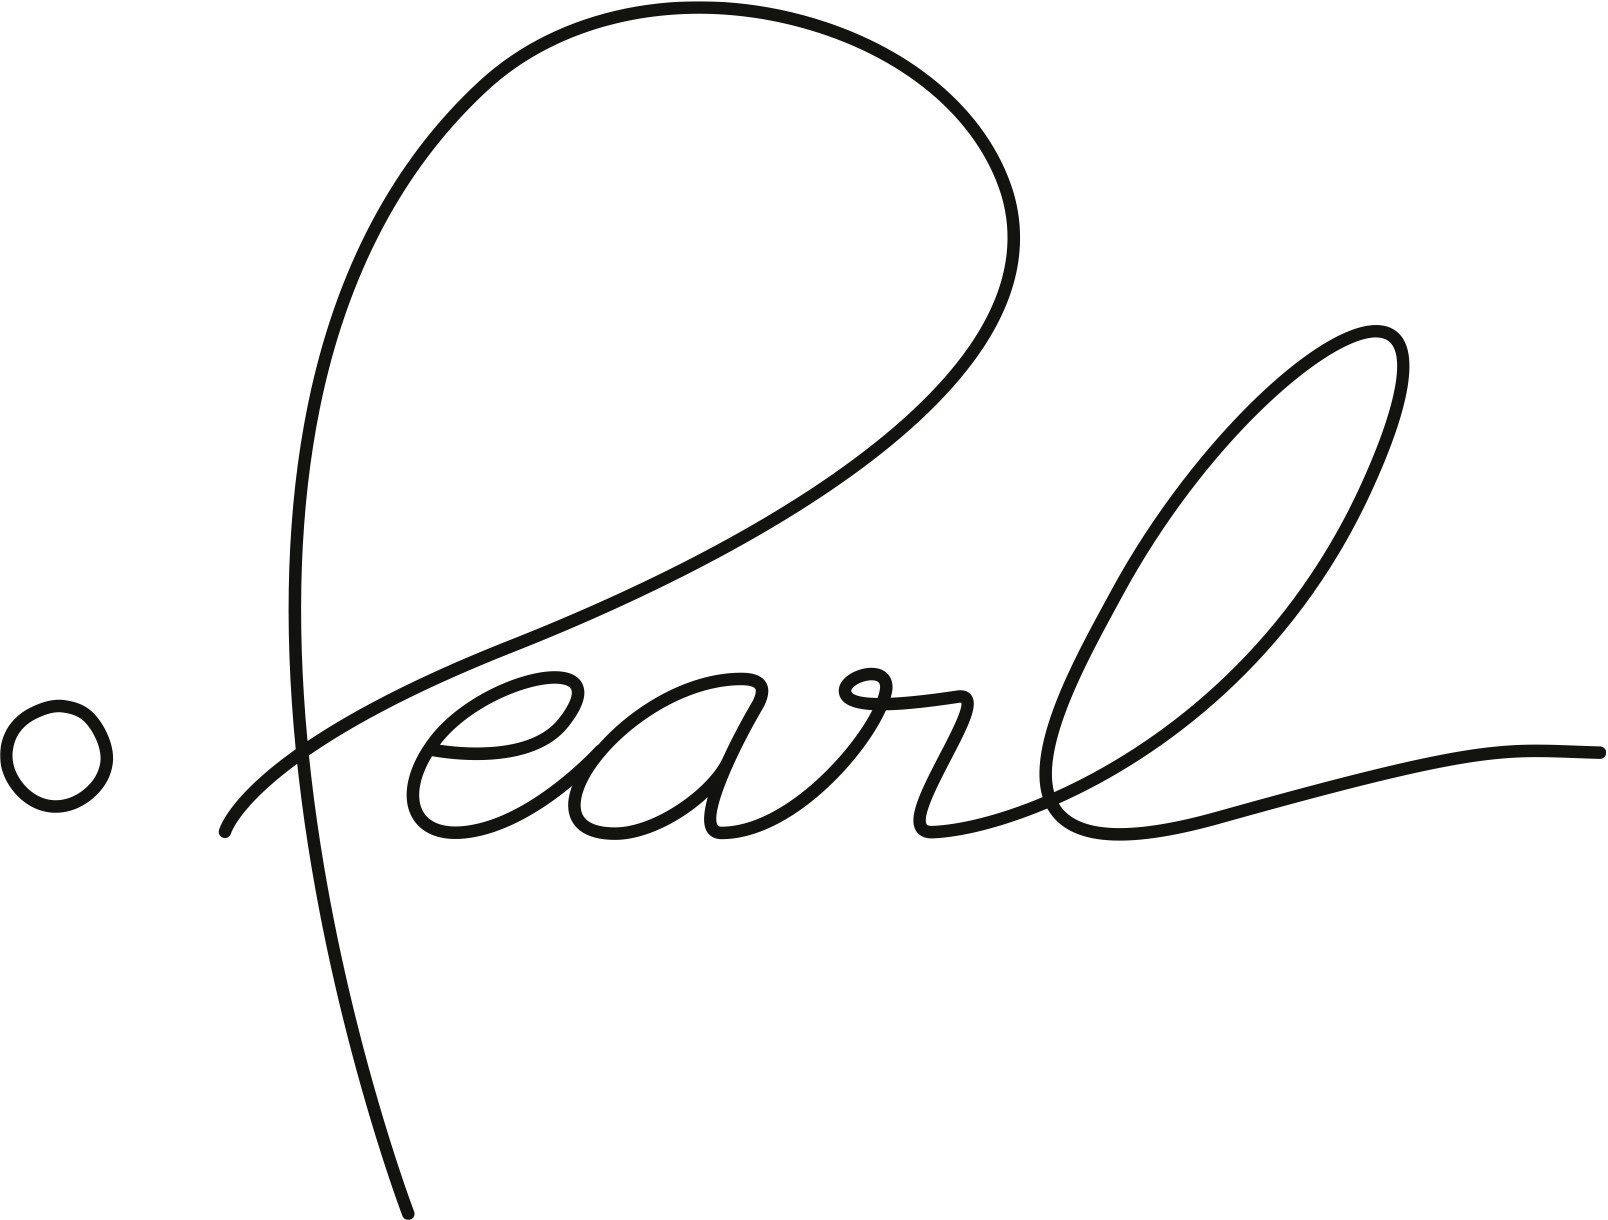 Pearl Granted Patent for AI System to Streamline Dental Restorative Workflow